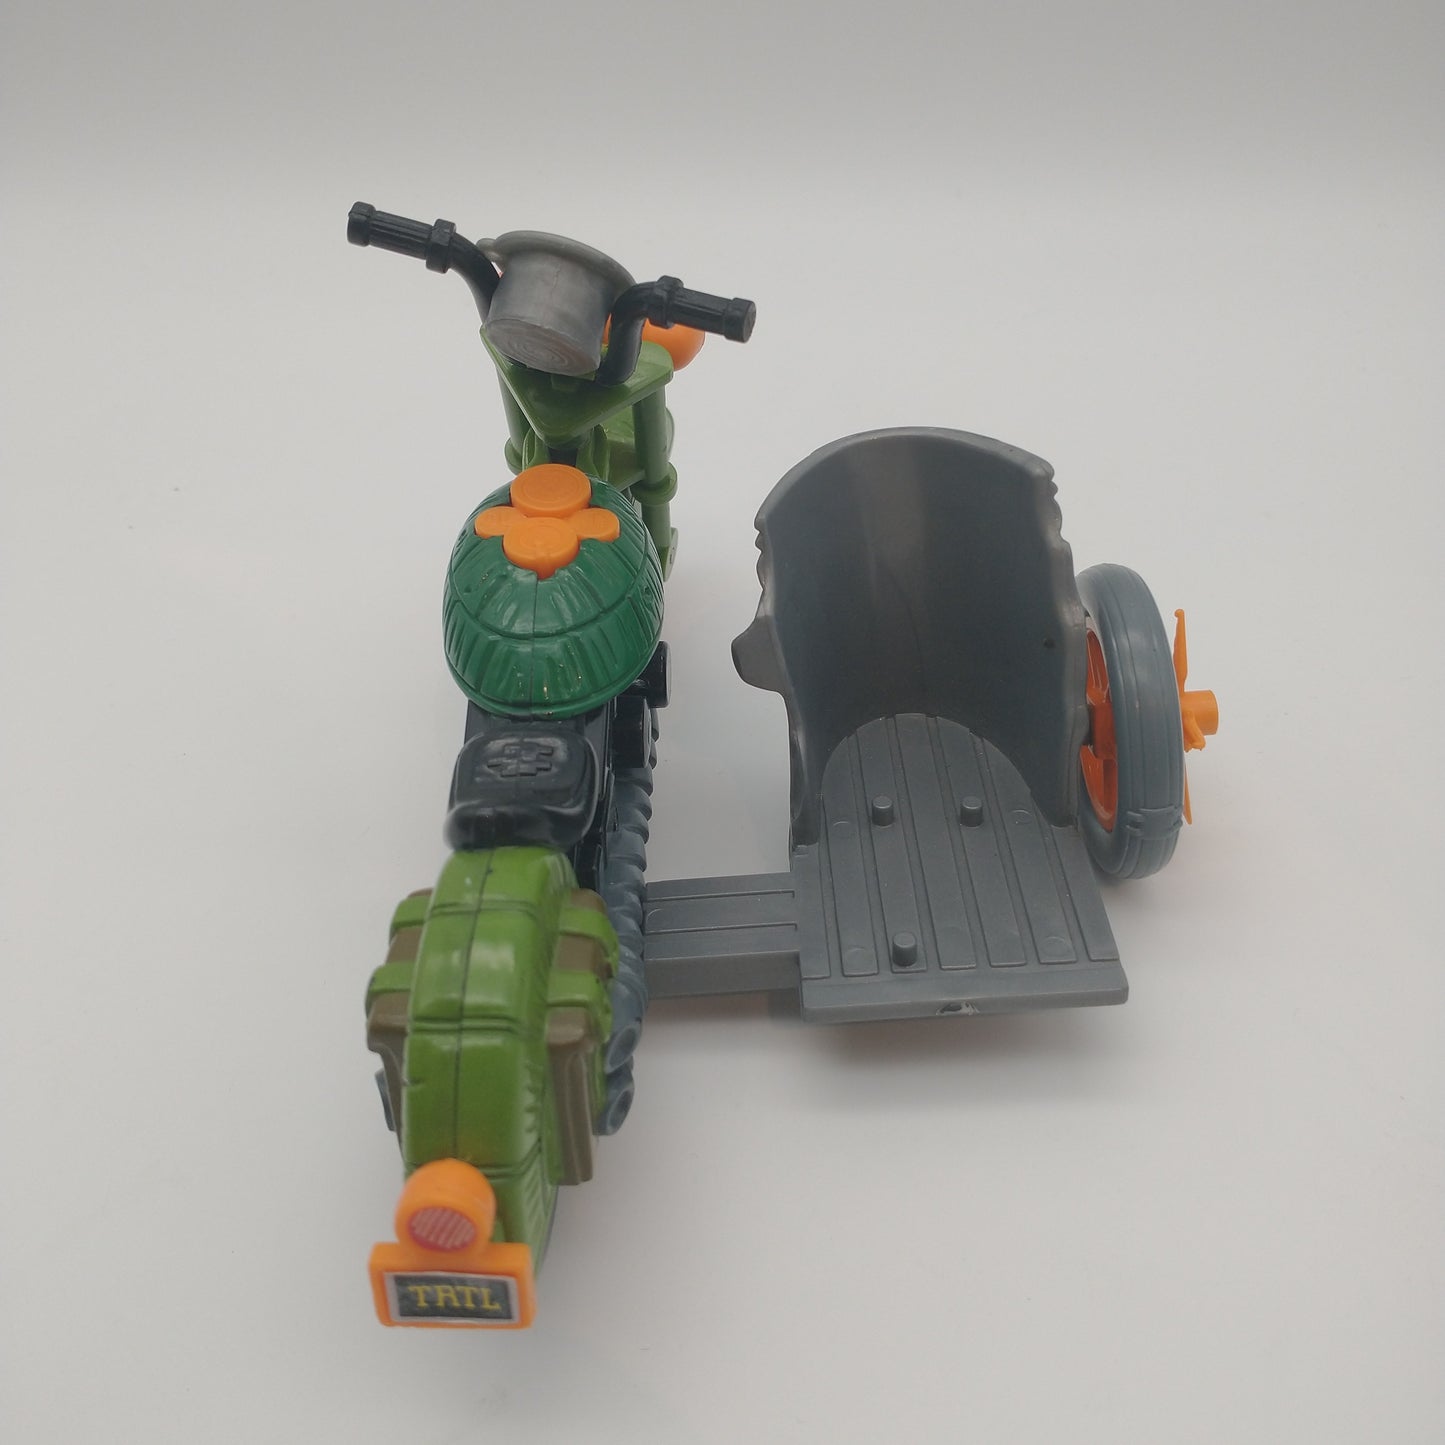 TMNT Turtlecycle 1989 Loose, 100% Complete